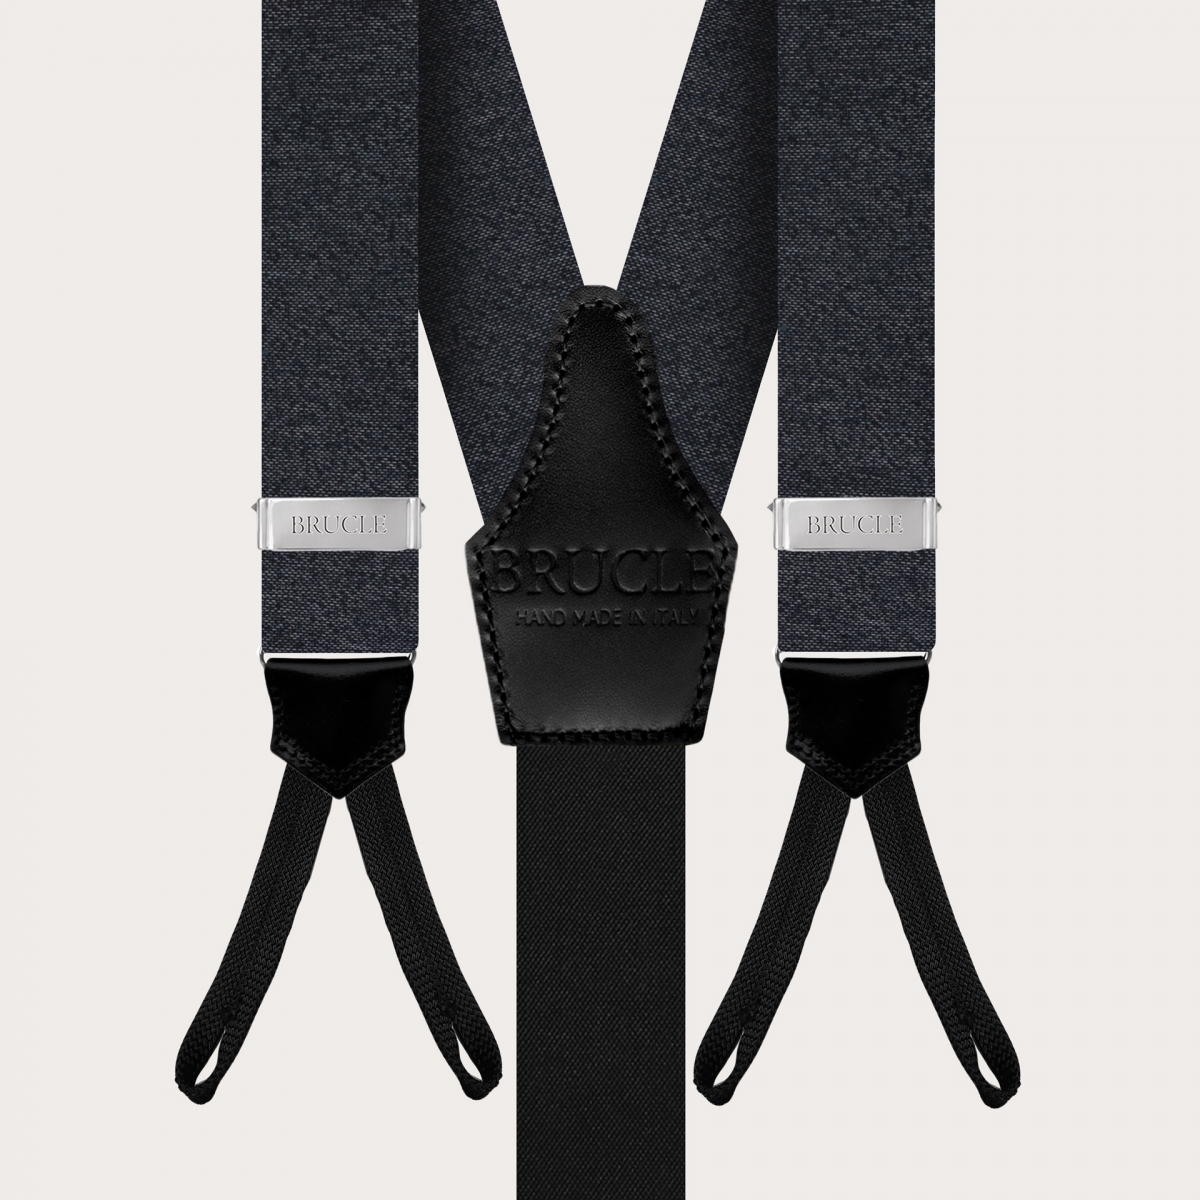 BRUCLE Melange grey set of suspenders with buttonholes, pochette and bow tie